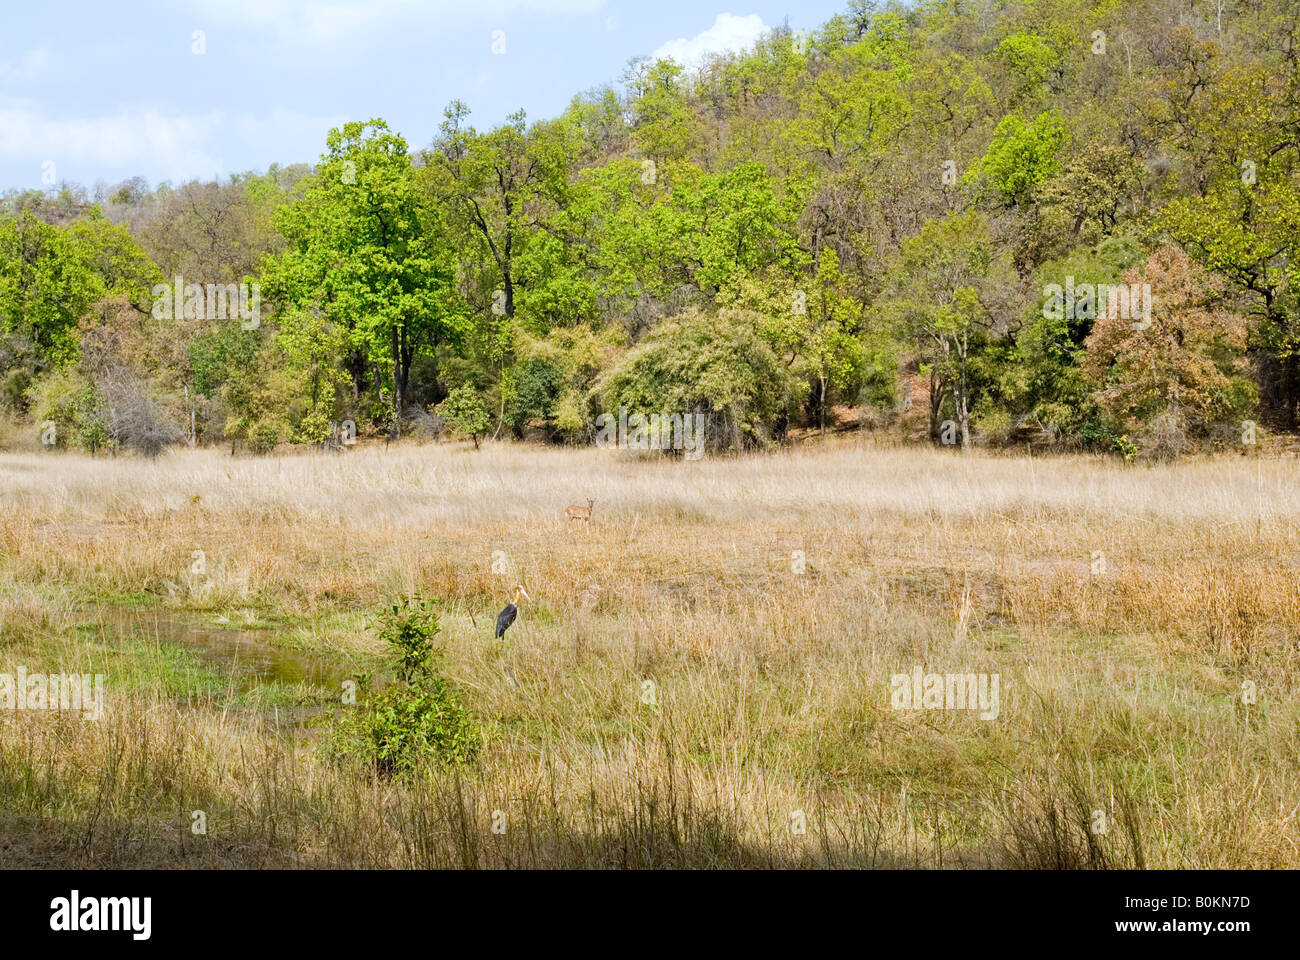 Sal forest and grassland in Bandhavgarh Tiger Reserve Stock Photo